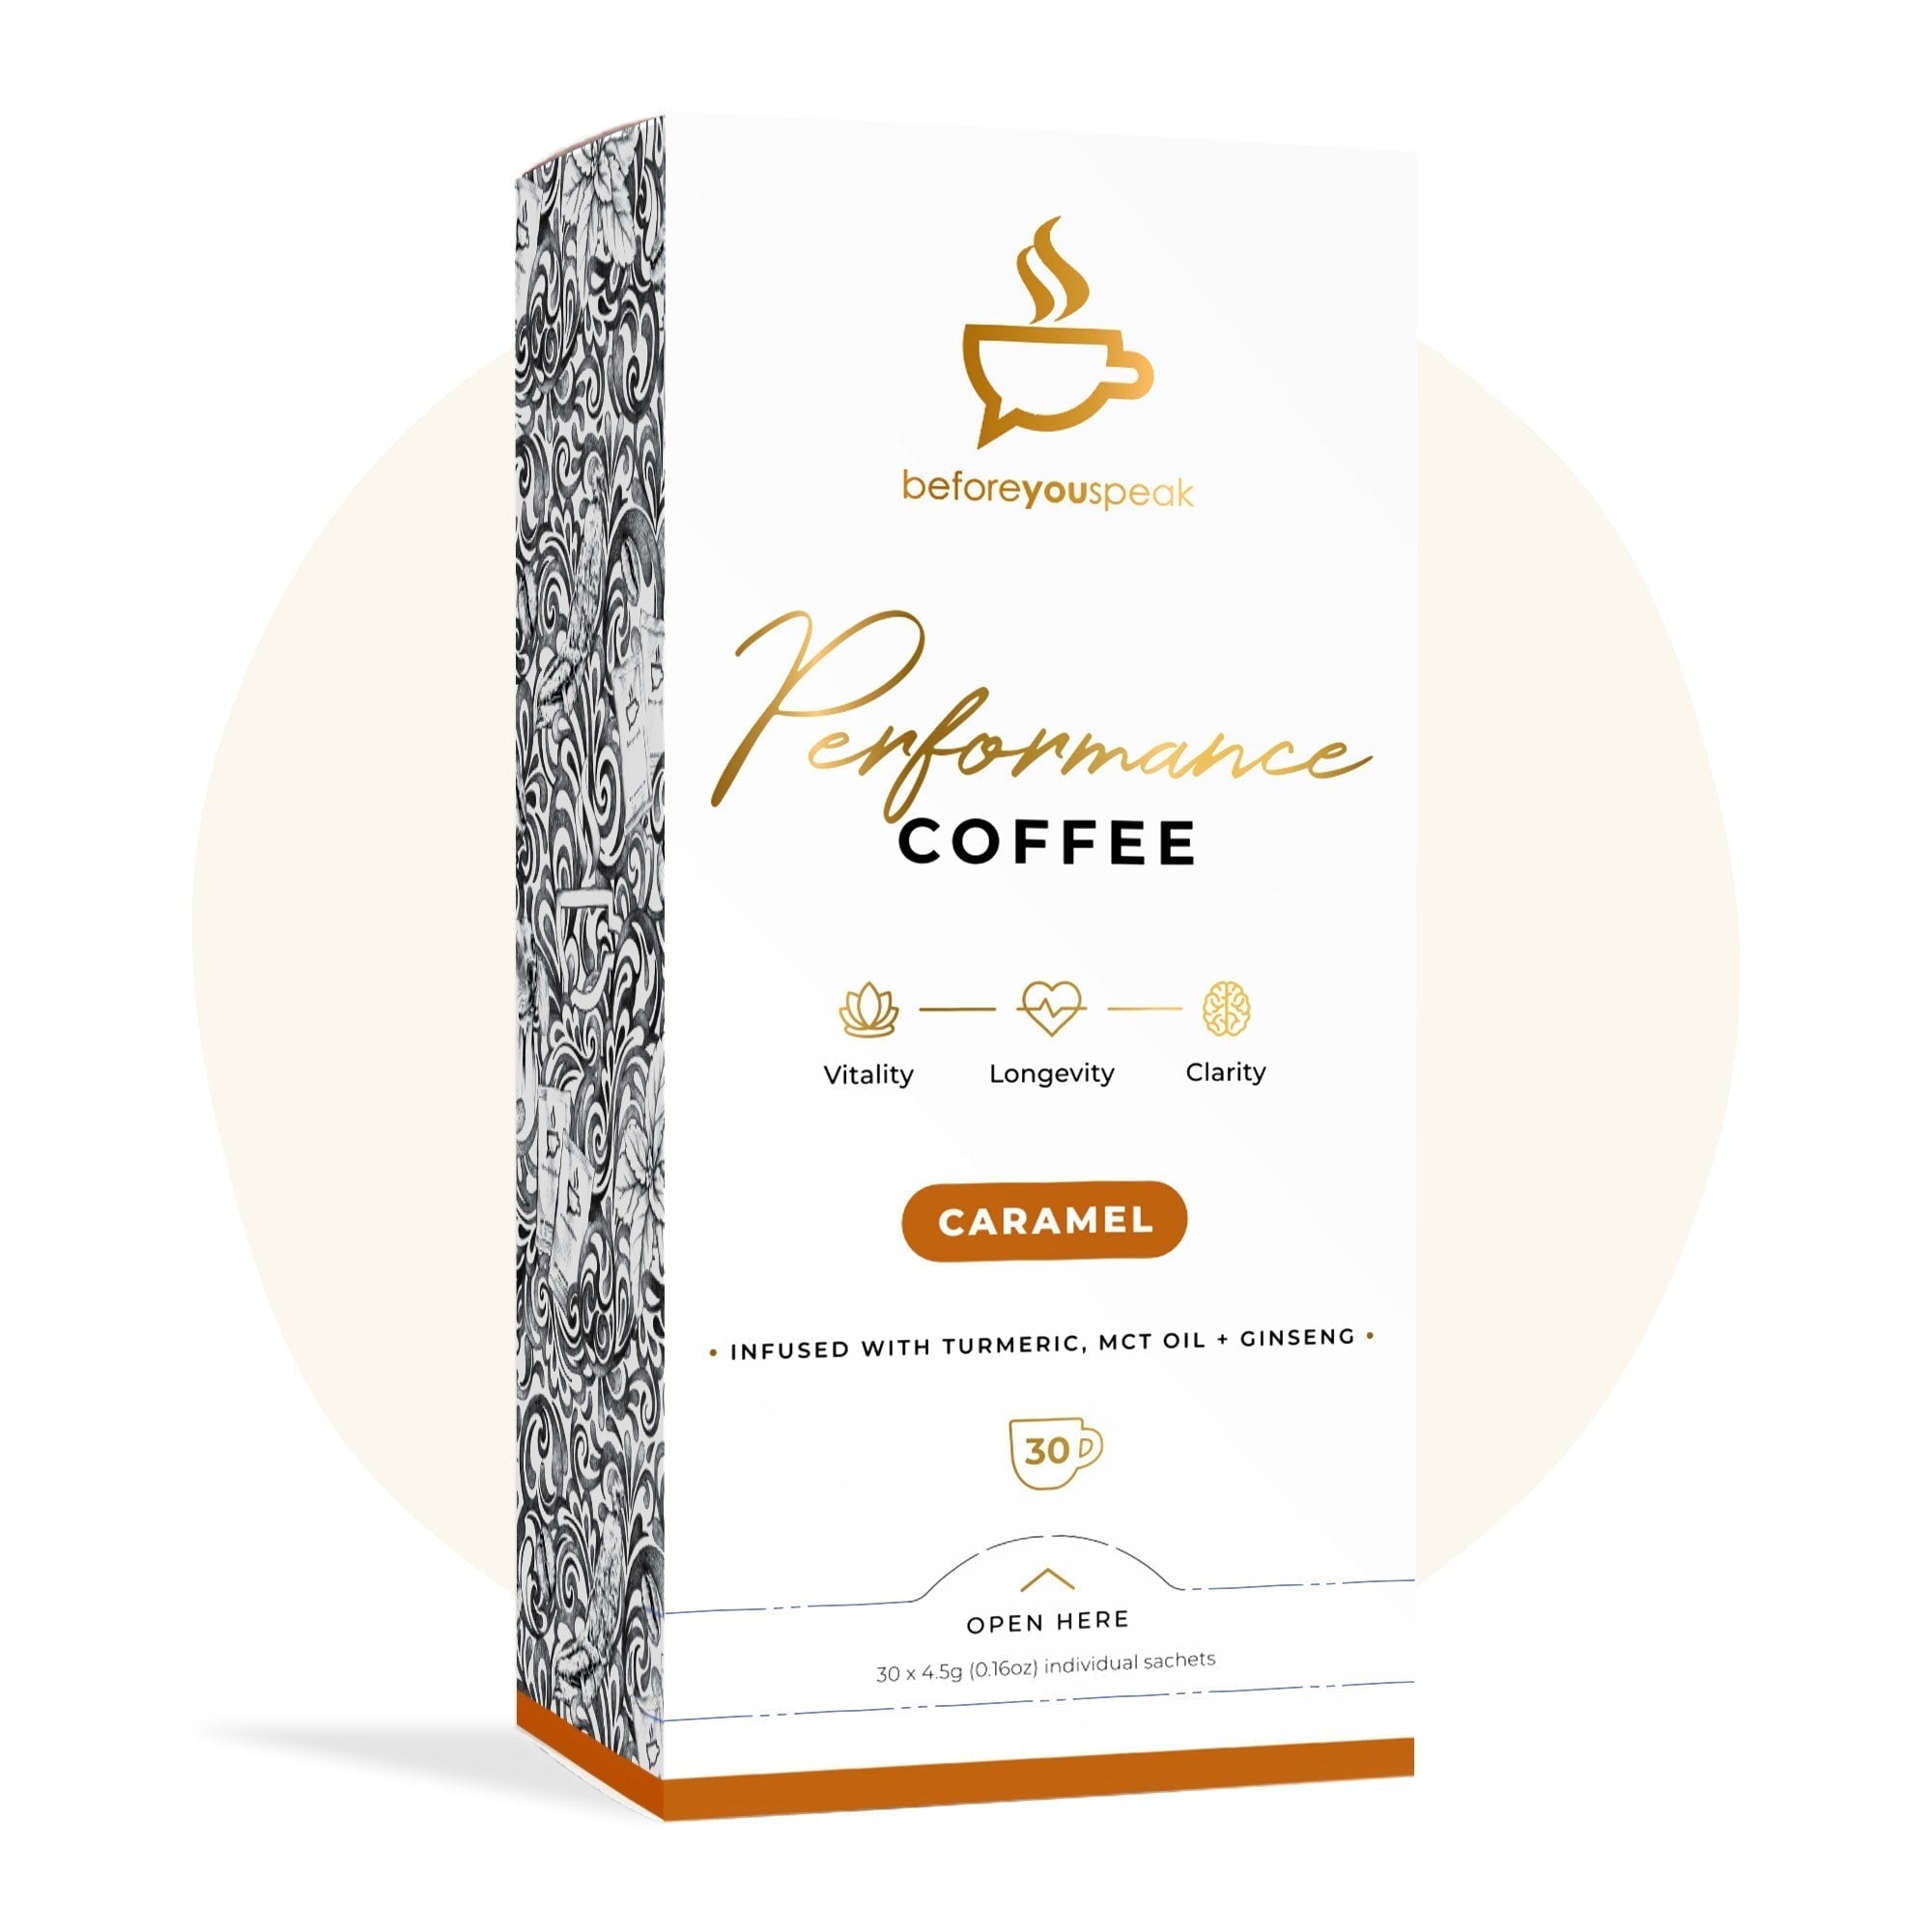 High Performance Coffee Caramel - Exquisite Laser Clinic